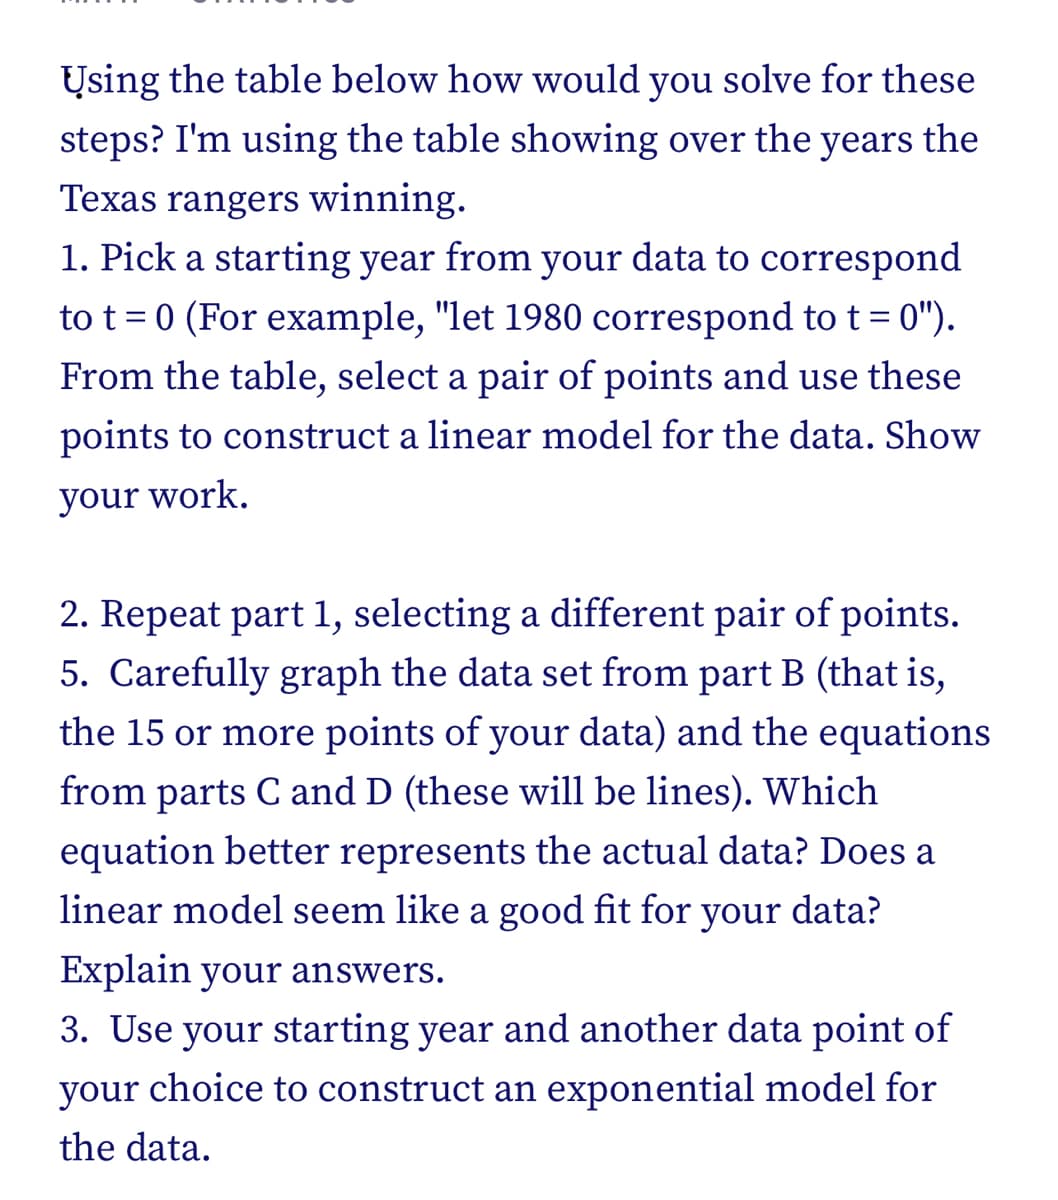 Using the table below how would you solve for these
steps? I'm using the table showing over the years the
Texas rangers winning.
1. Pick a starting year from your data to correspond
to t = 0 (For example, "let 1980 correspond to t = 0").
From the table, select a pair of points and use these
points to construct a linear model for the data. Show
your work.
2. Repeat part 1, selecting a different pair of points.
5. Carefully graph the data set from part B (that is,
the 15 or more points of your data) and the equations
from parts C and D (these will be lines). Which
equation better represents the actual data? Does a
linear model seem like a good fit for your data?
Explain your answers.
3. Use your starting year and another data point of
your choice to construct an exponential model for
the data.